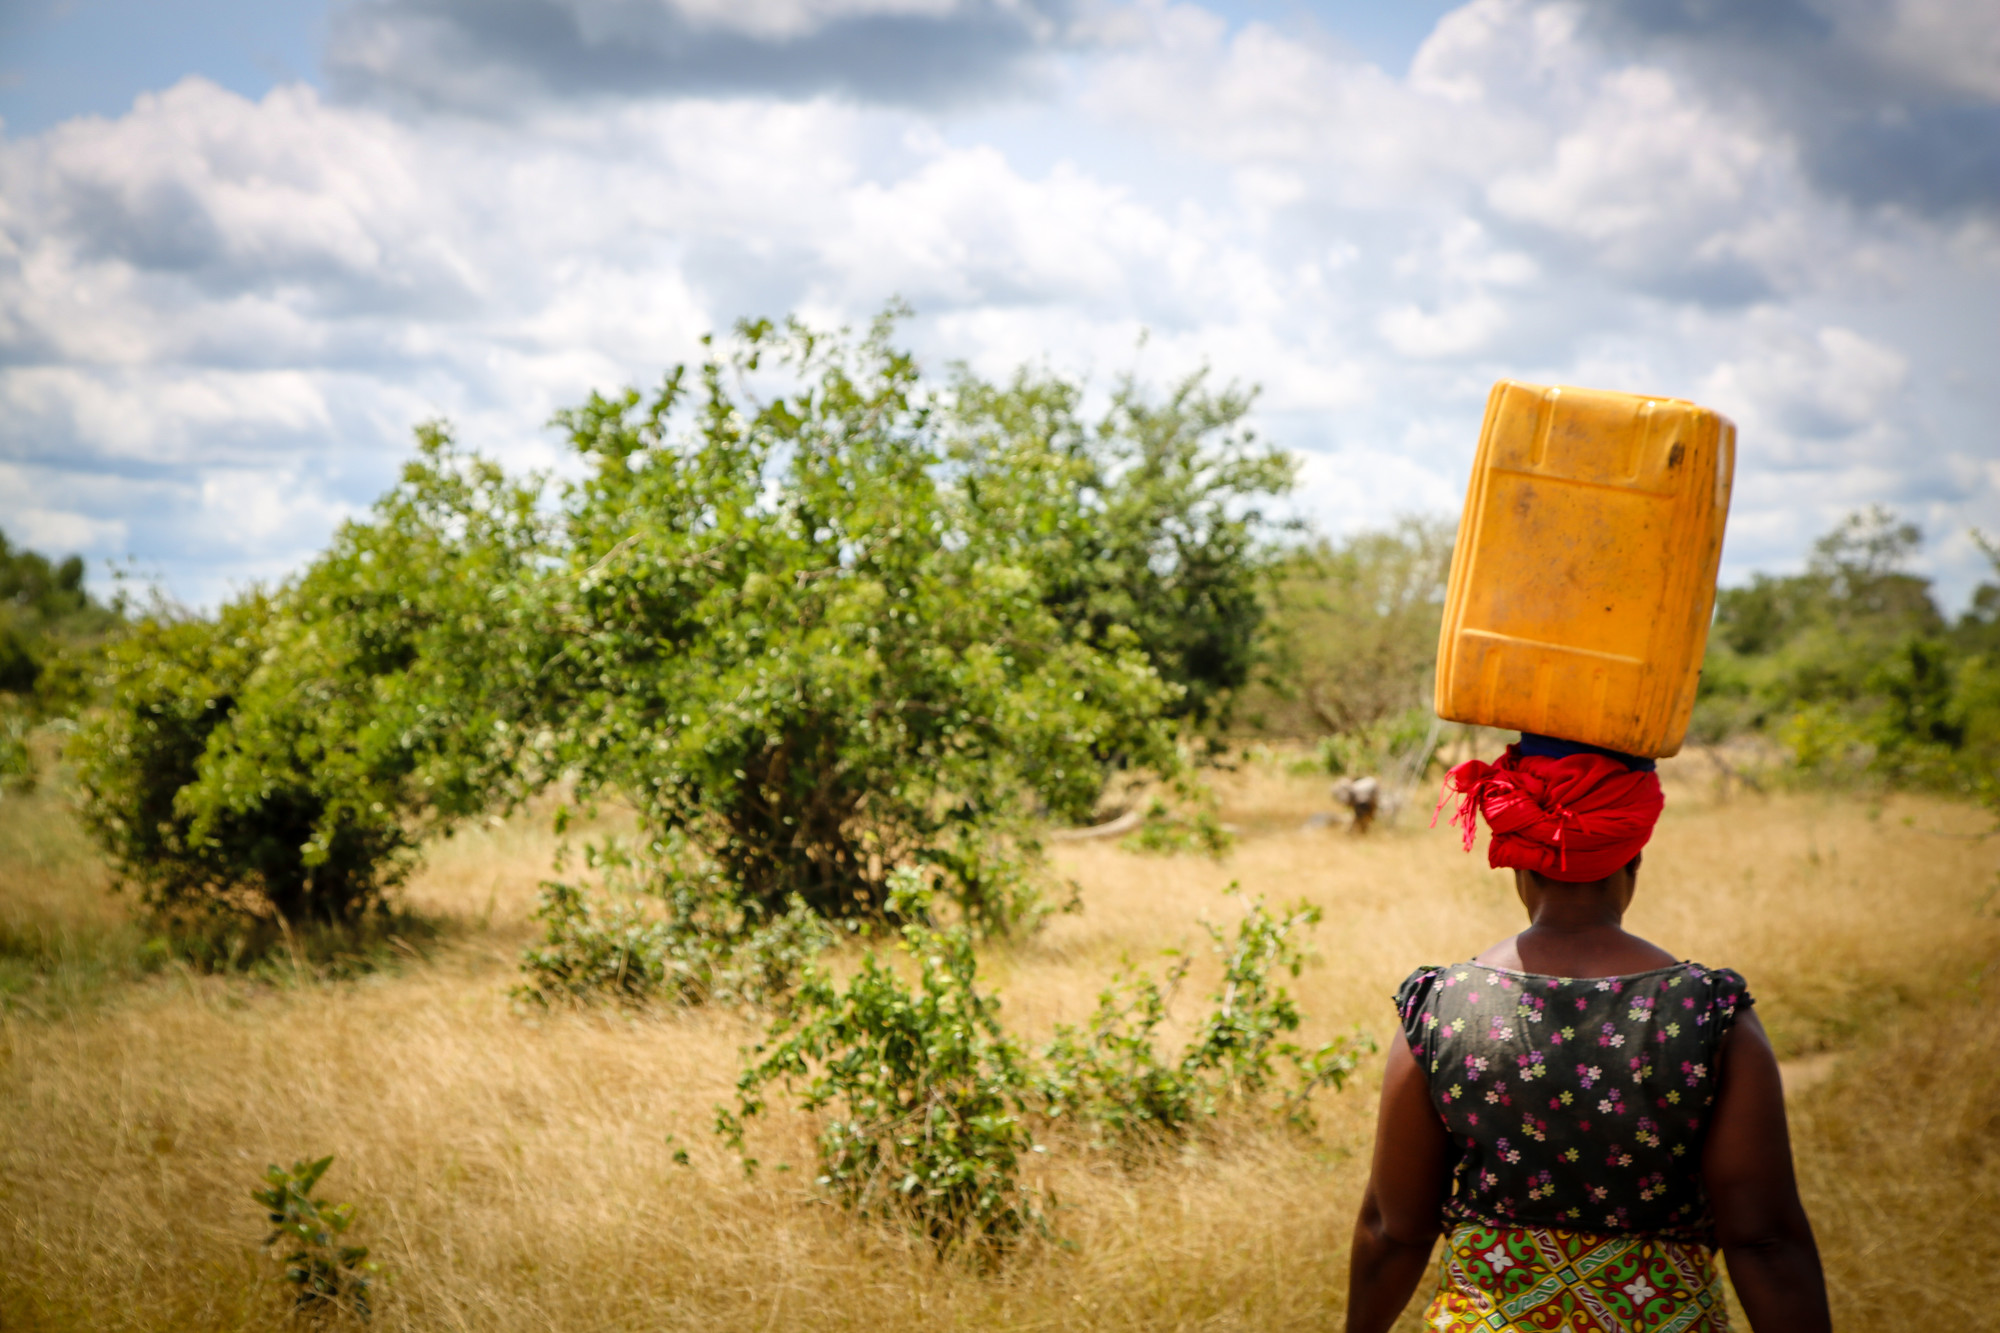 A woman in Kenya travels to get safe water--a commodity all the more vital in the work of COVID-19 prevention in Kenya.